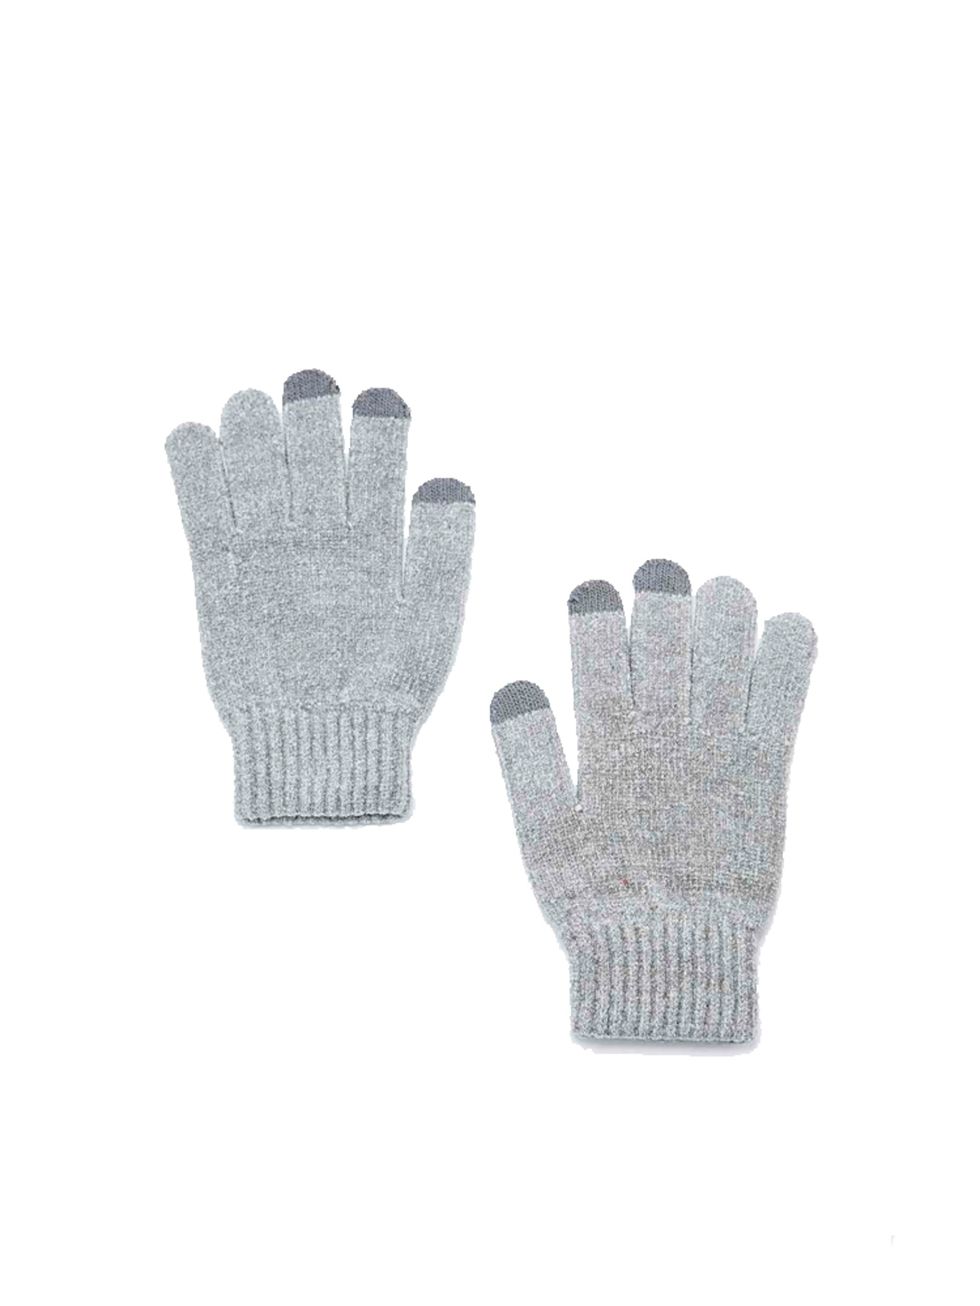 <p>Gloves that work on a touch screen phone - for that all important on-the-move selfie.<br />
 </p>

<p><a href="http://www.urbanoutfitters.com/uk/catalog/productdetail.jsp?id=5752468611682&parentid=SEARCH+RESULTS#/" target="_blank">Touchscreen gloves</a